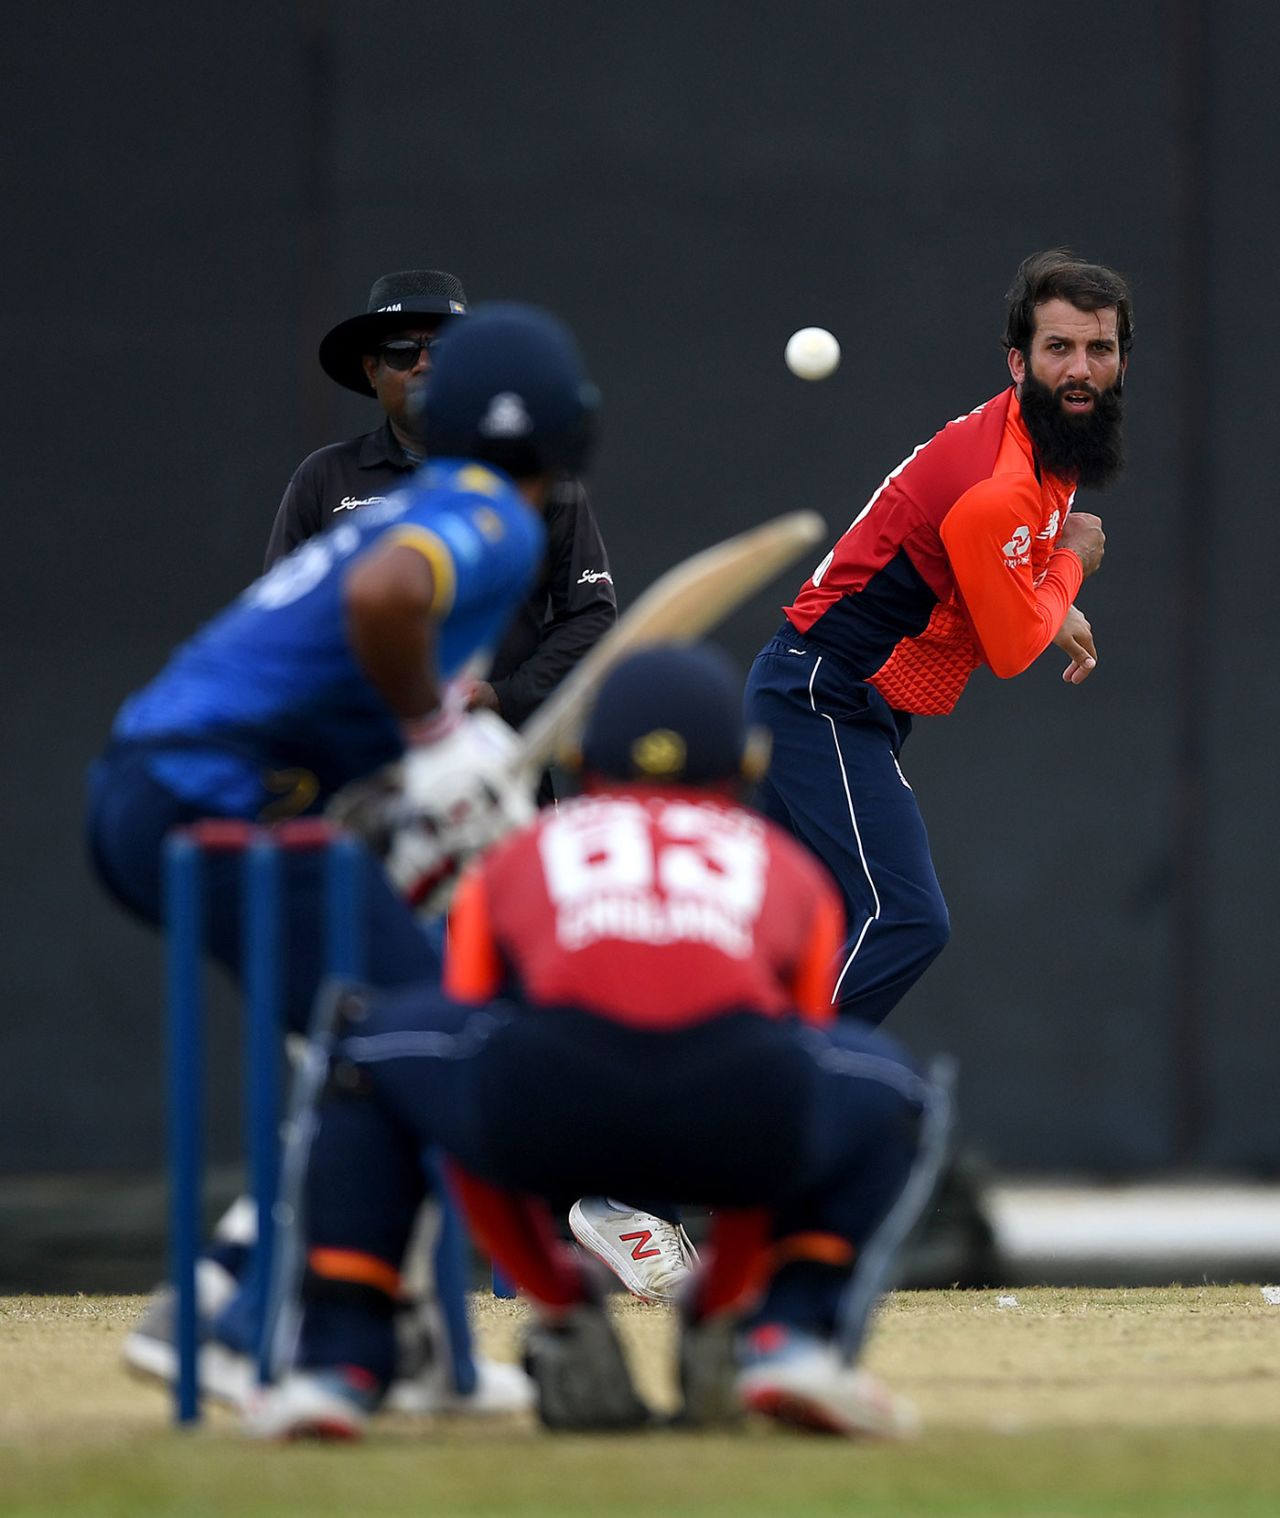 Moeen Ali had a good day with the ball, Sri Lanka Board XI v England, tour match, P Sara Oval, October 5, 2018